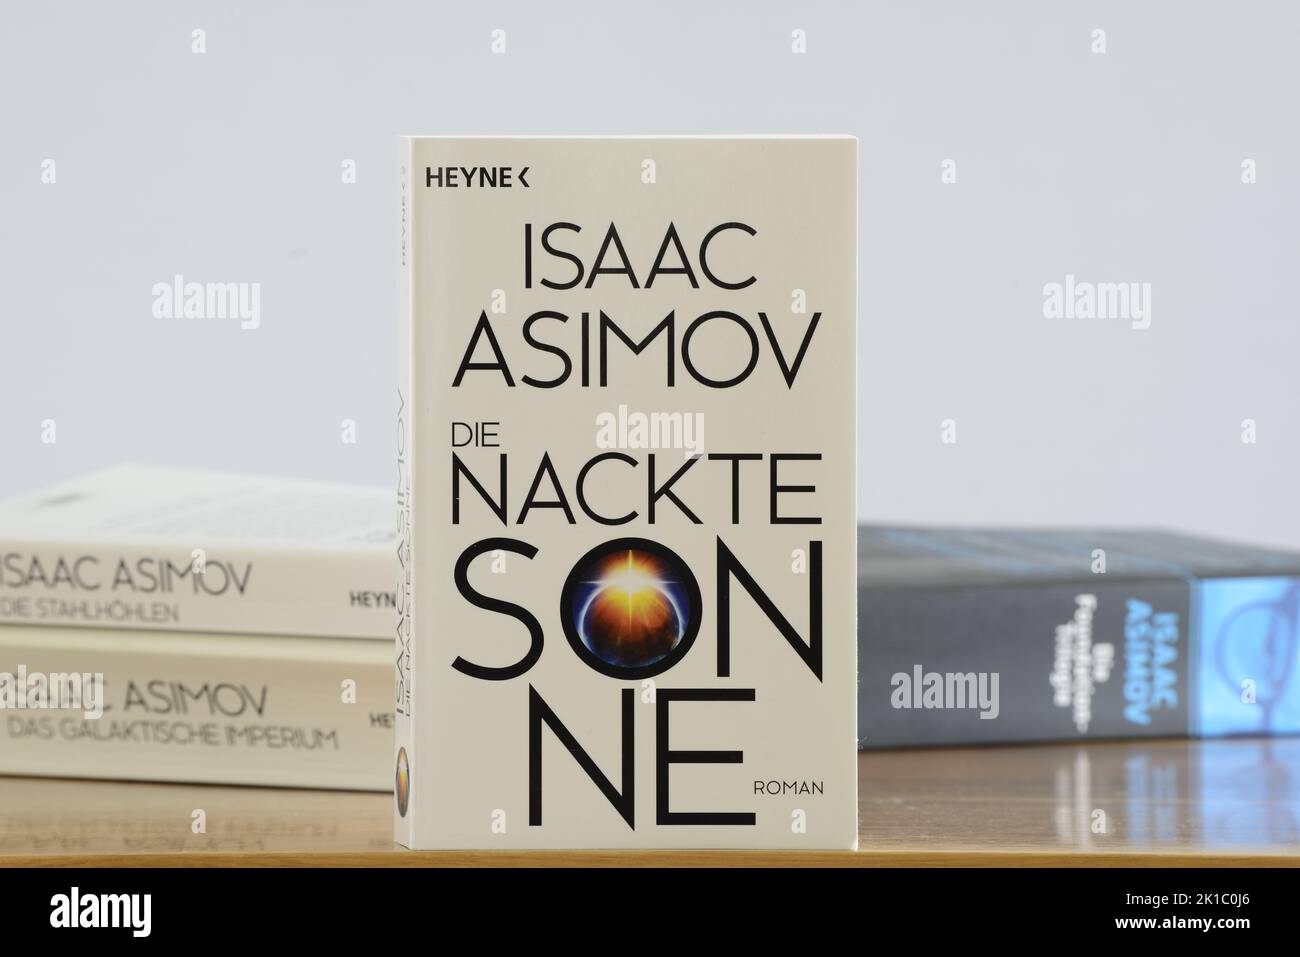 Isaac Asimov The Naked Sun. Note that I do not have a property release on this image and it may be used for editorial only. You cannot use this image Stock Photo